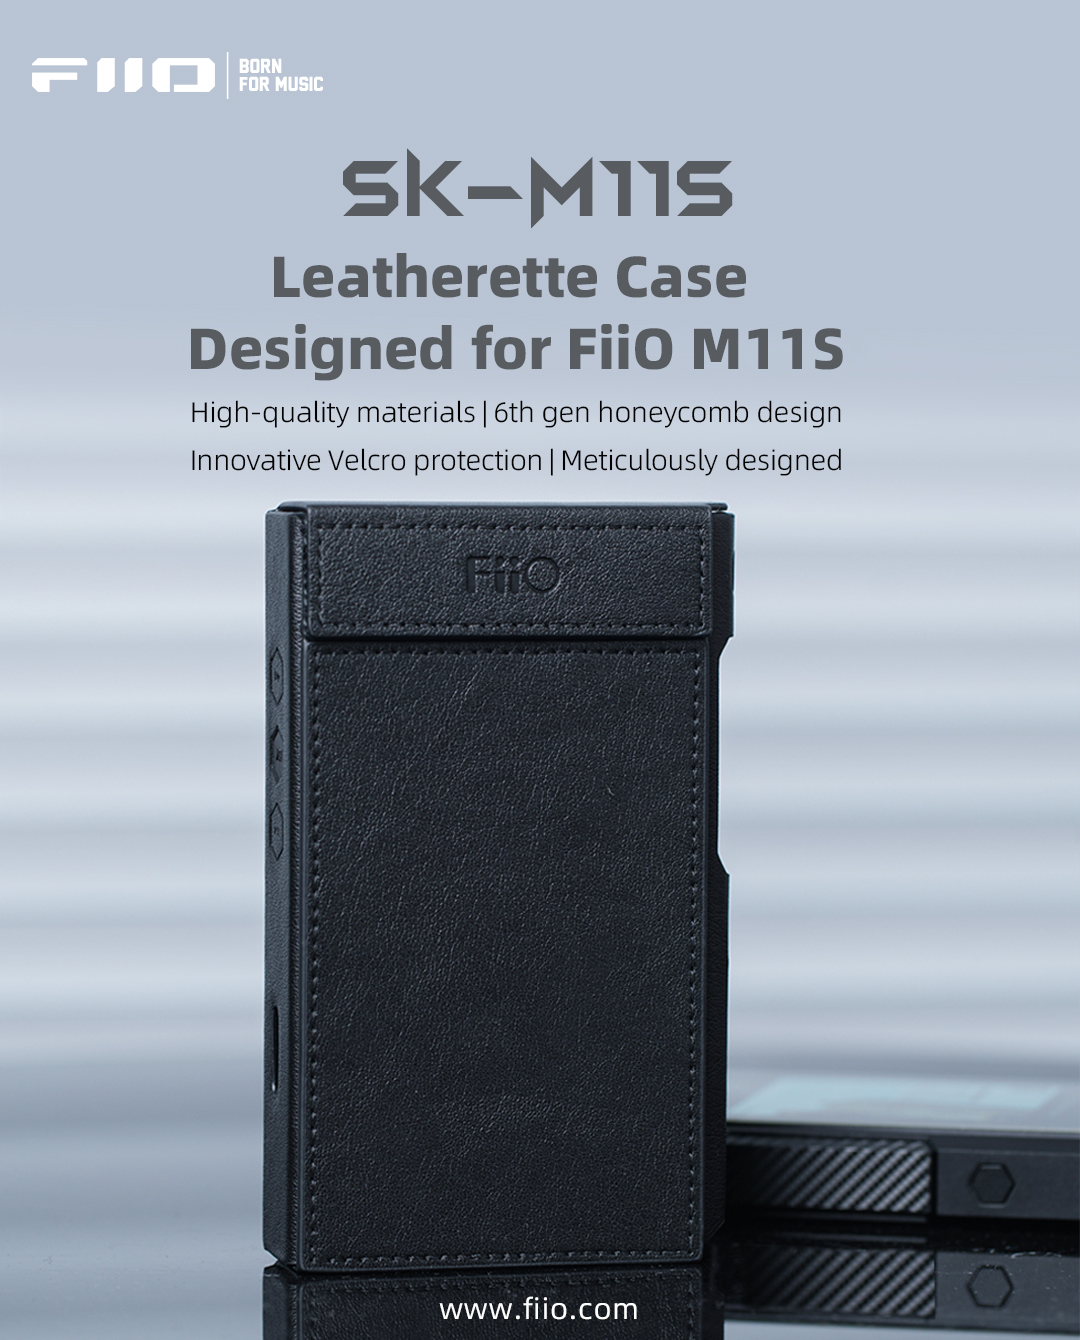 With an Innovative Design and Reliable Protection, the SK-M11S Is